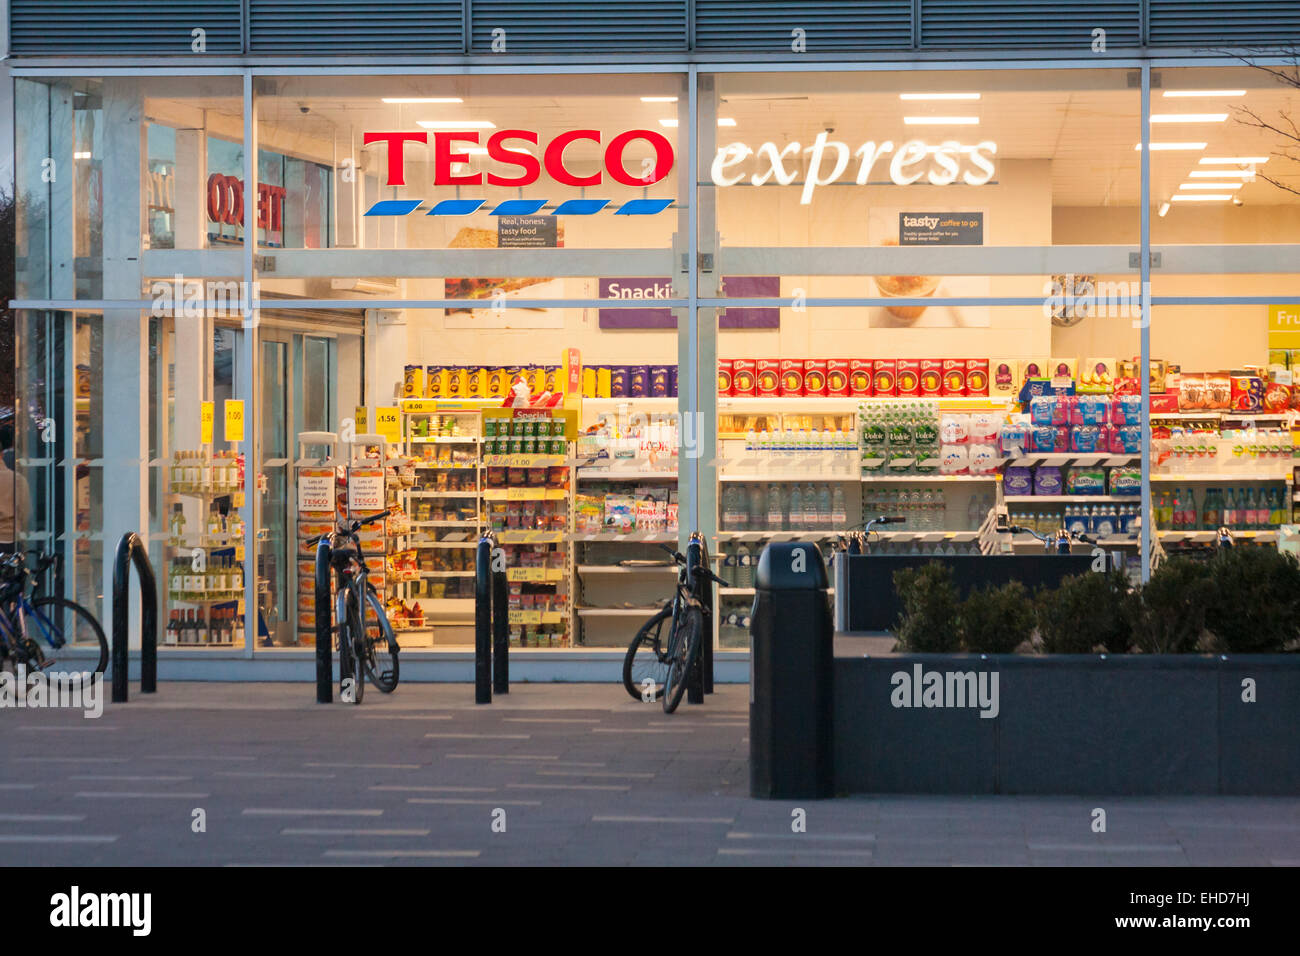 https://c8.alamy.com/comp/EHD7HJ/tesco-express-store-shop-front-exterior-entrance-at-dusk-at-greenwich-EHD7HJ.jpg